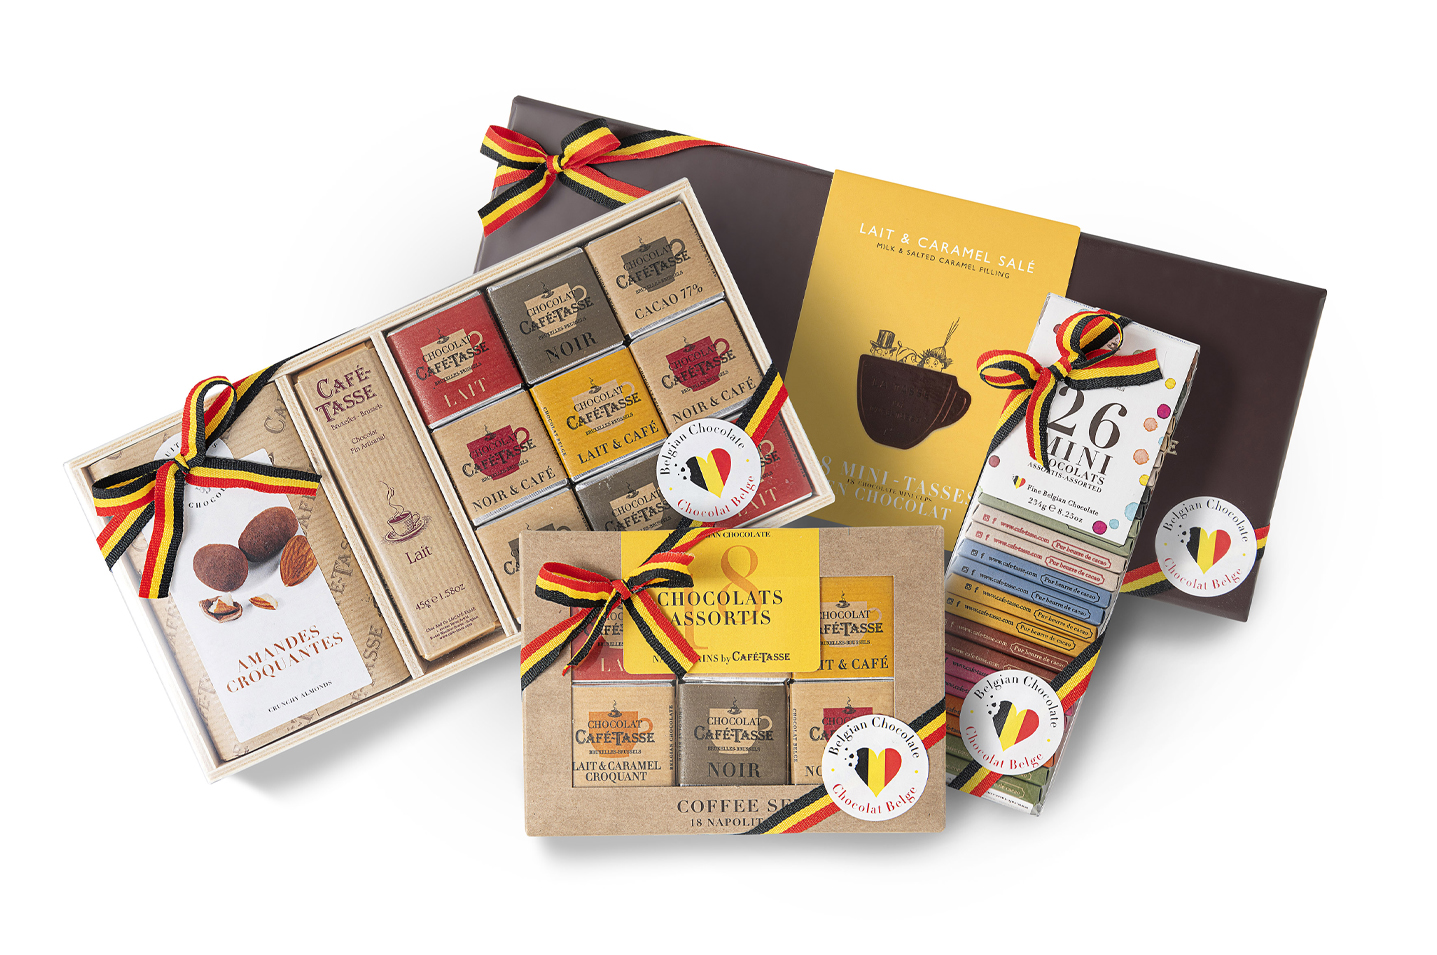 Order a Chocolate Promotional Gift Online